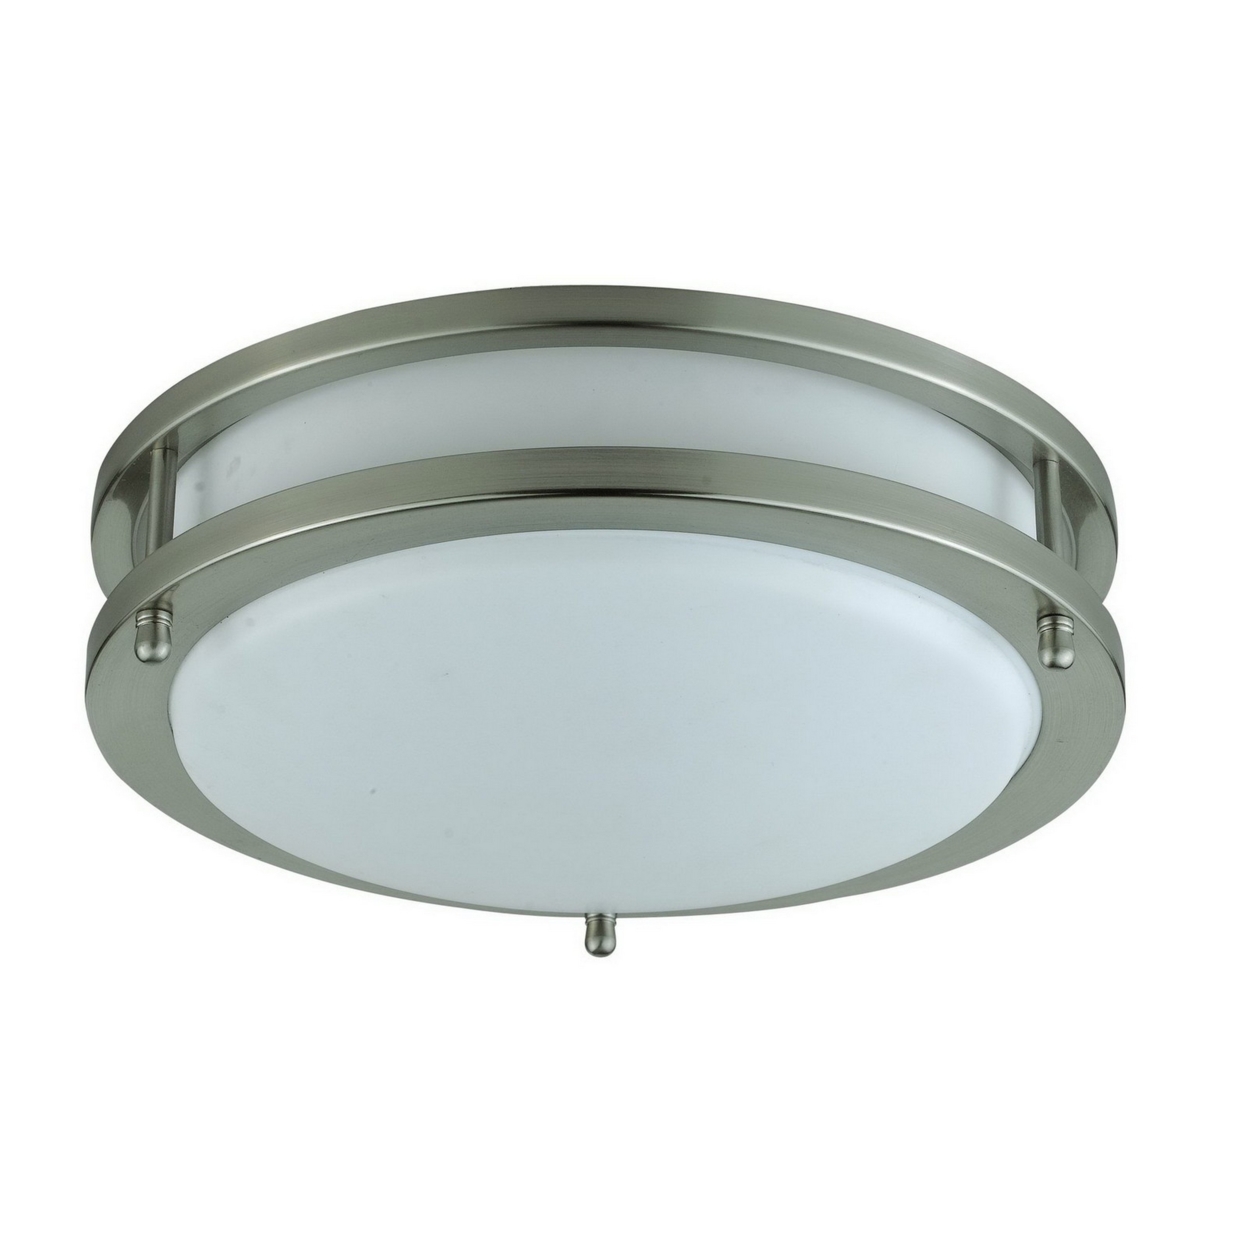 10 Inch Modern Ceiling Lamp With Frosted Acrylic Plate, Steel Trim, White- Saltoro Sherpi